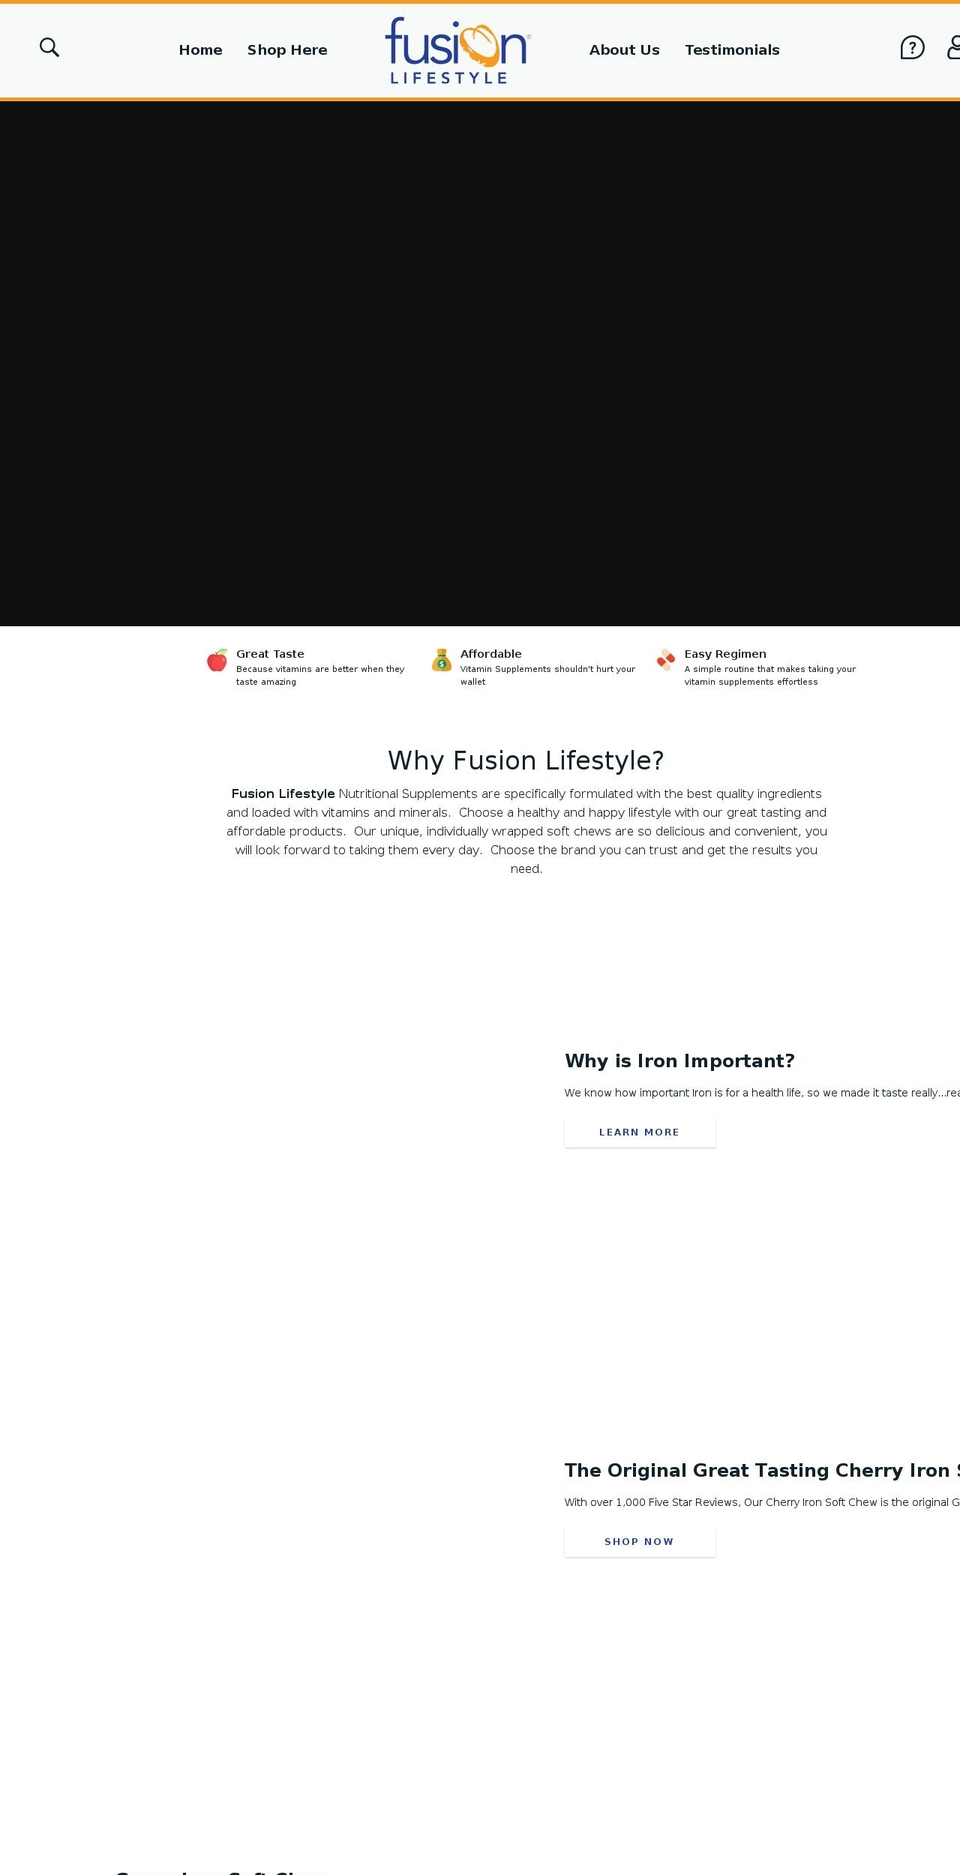 Fusion Shopify theme site example fusionlifestyle.com